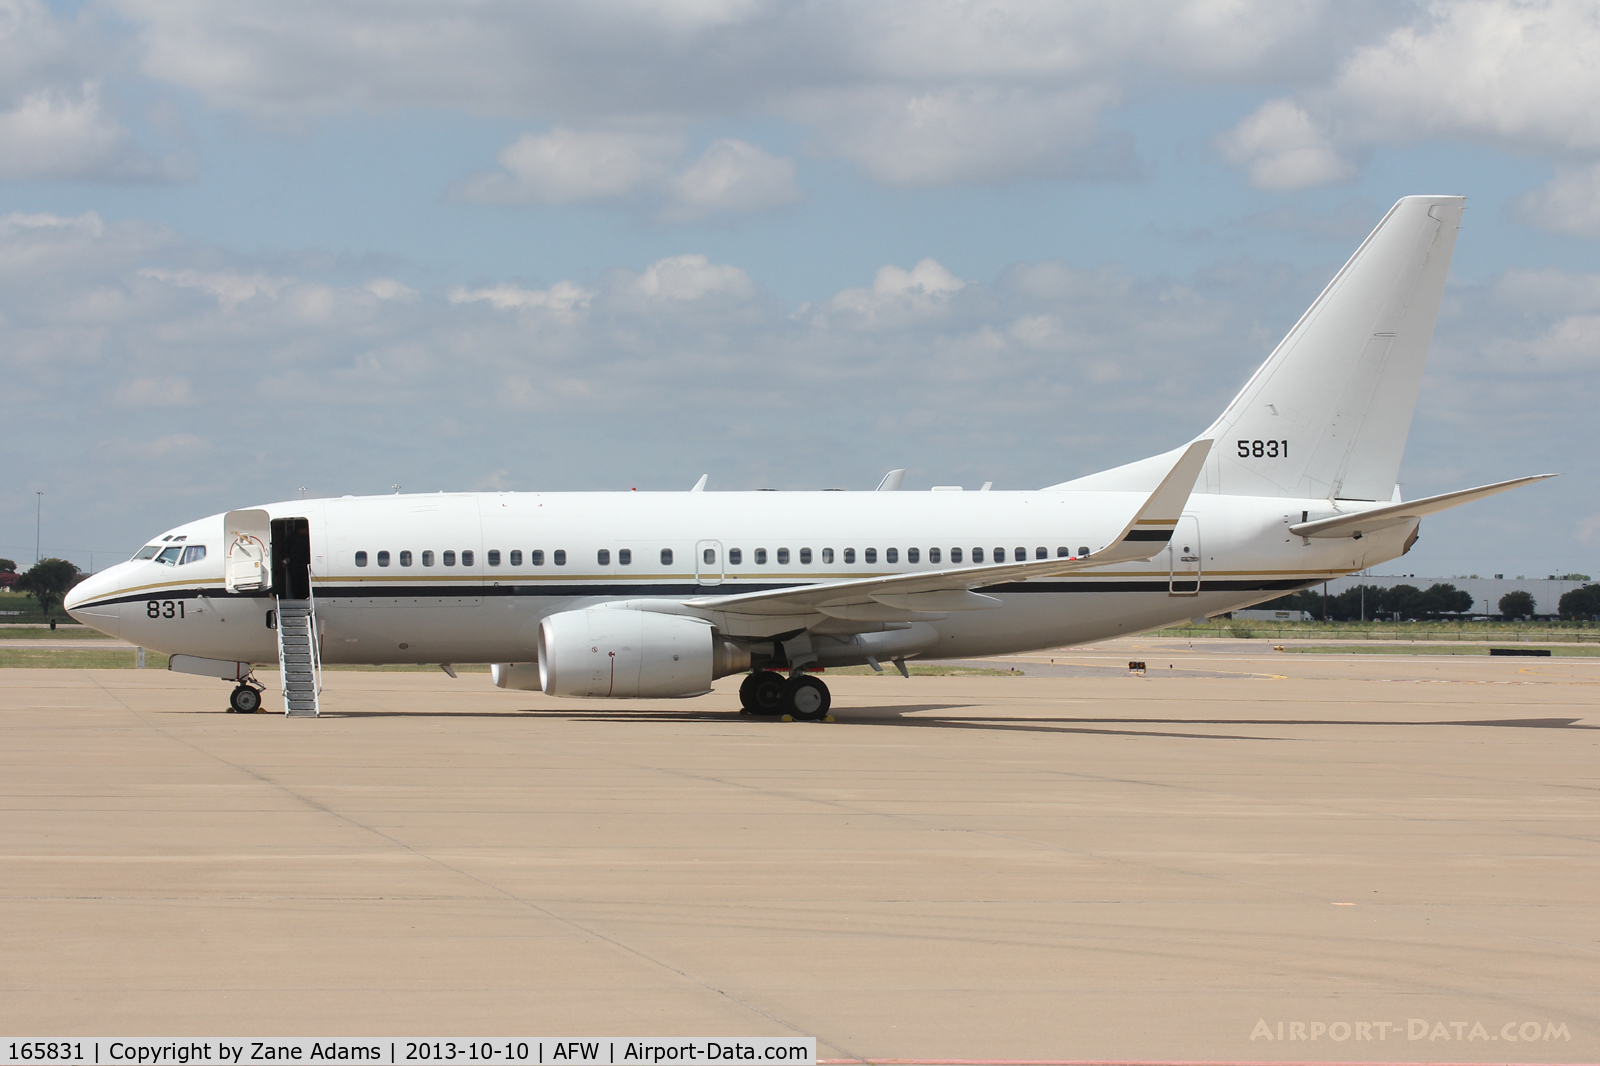 165831, 2000 Boeing C-40A Clipper (737-fAF) C/N 30200, At Alliance Airport - Fort Worth, TX